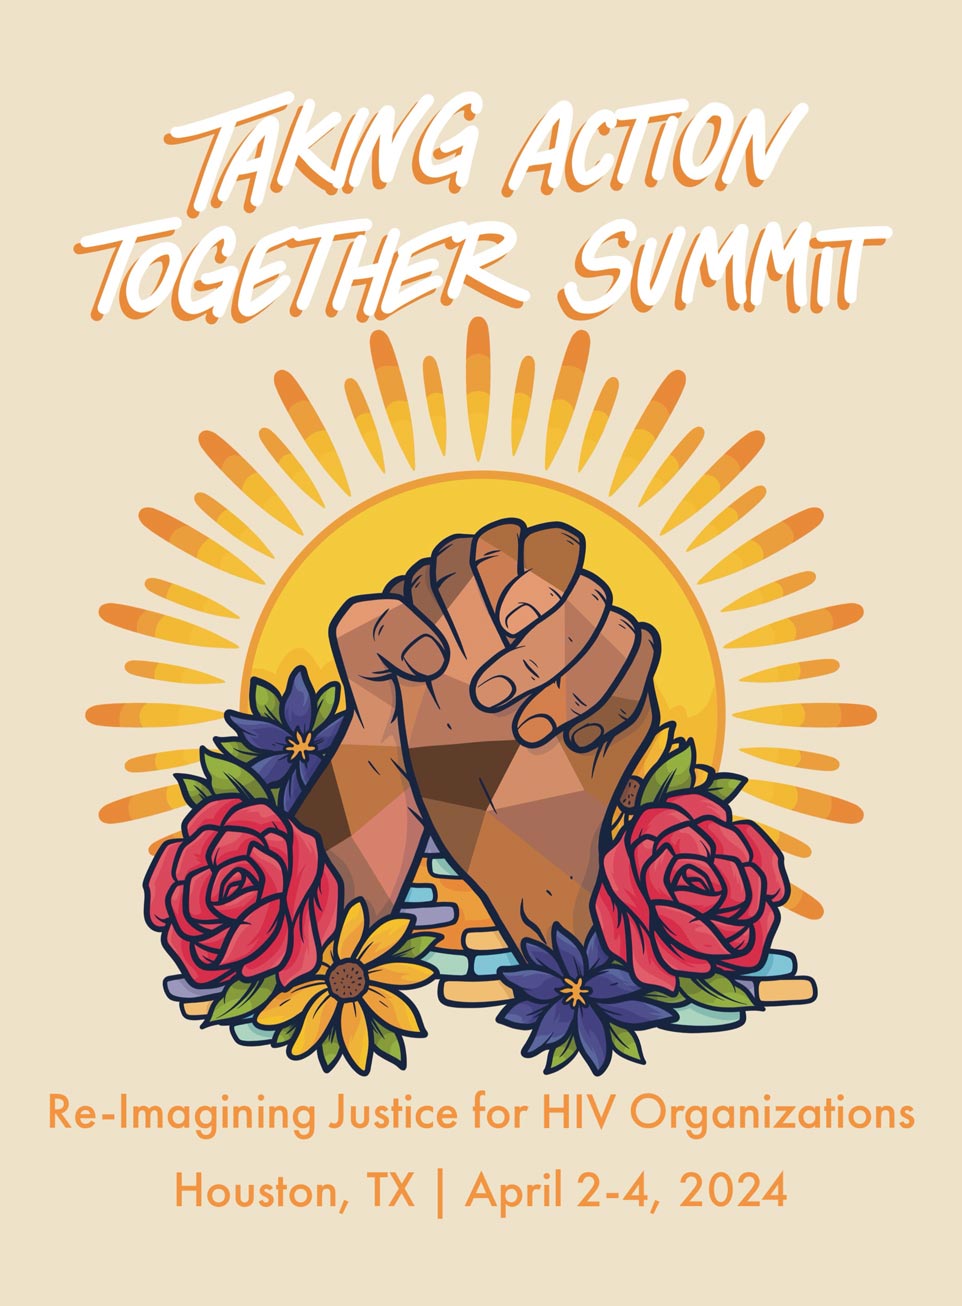 Taking Action Together Summit, Re-Imagining Justice For HIV Organizations, Houston, Texas April 2 - 4, 2024